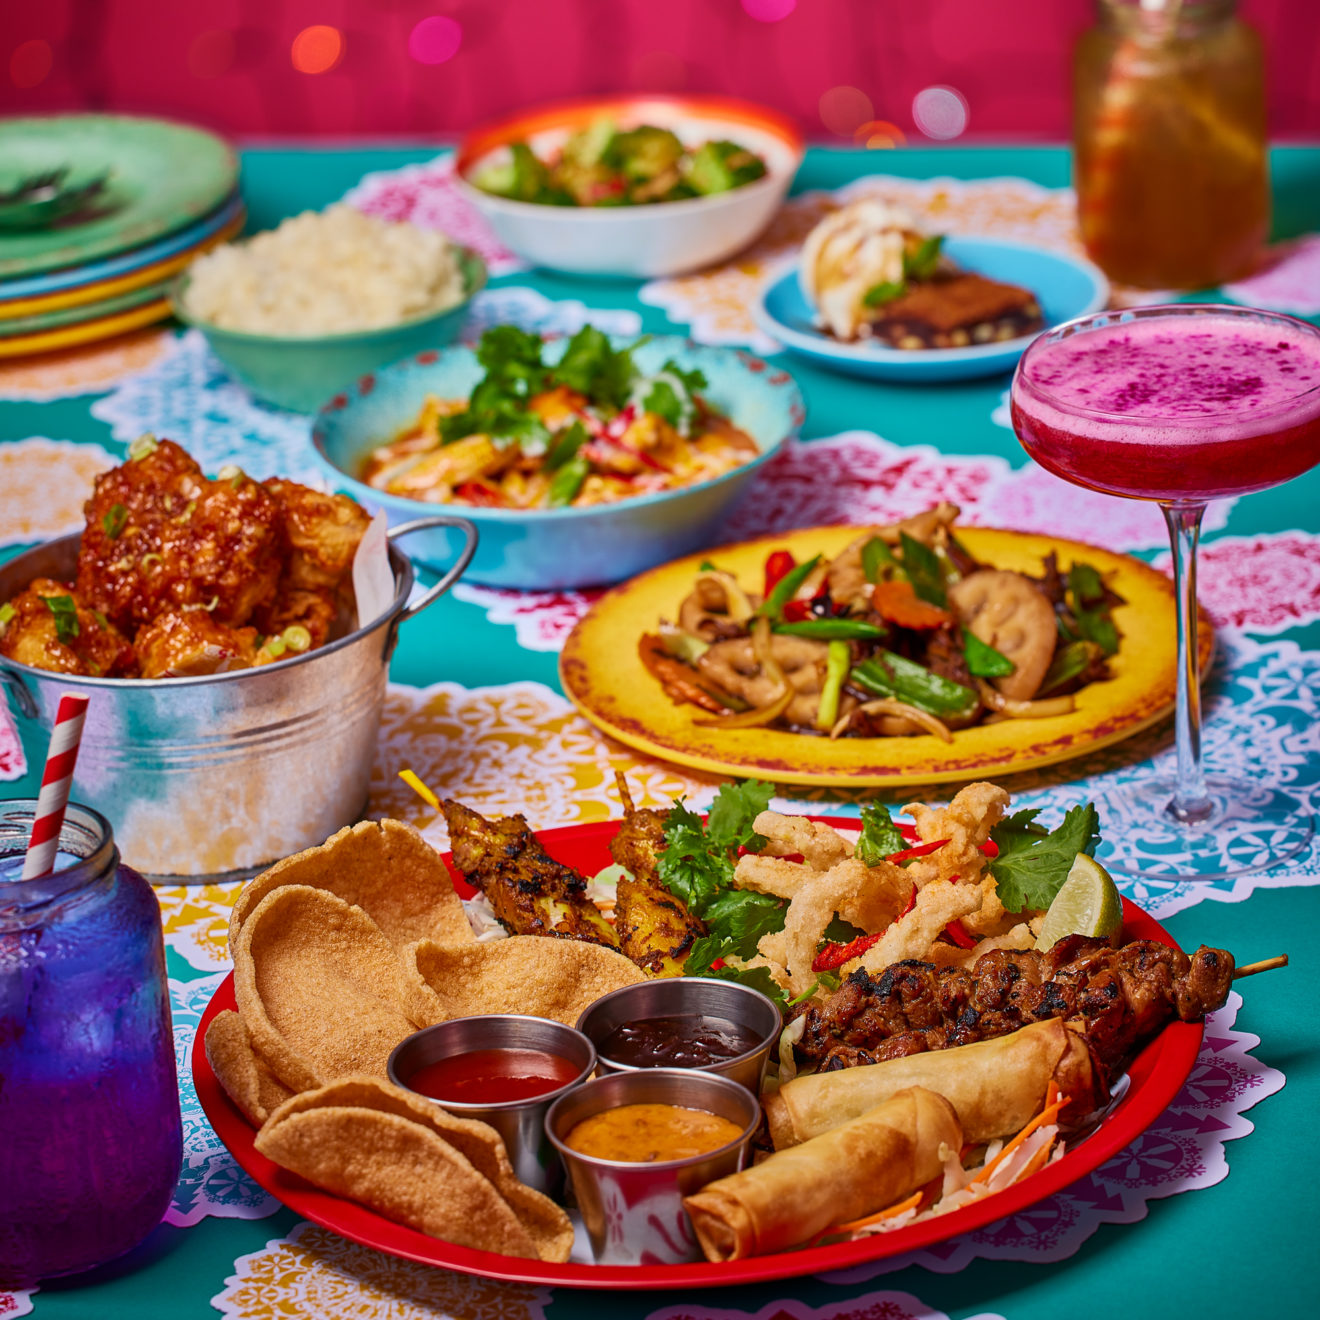 Thai feast food spread with sharing platter in the foreground on a teal table top with colourful doilies, bright pink background with multi coloured fairy lights